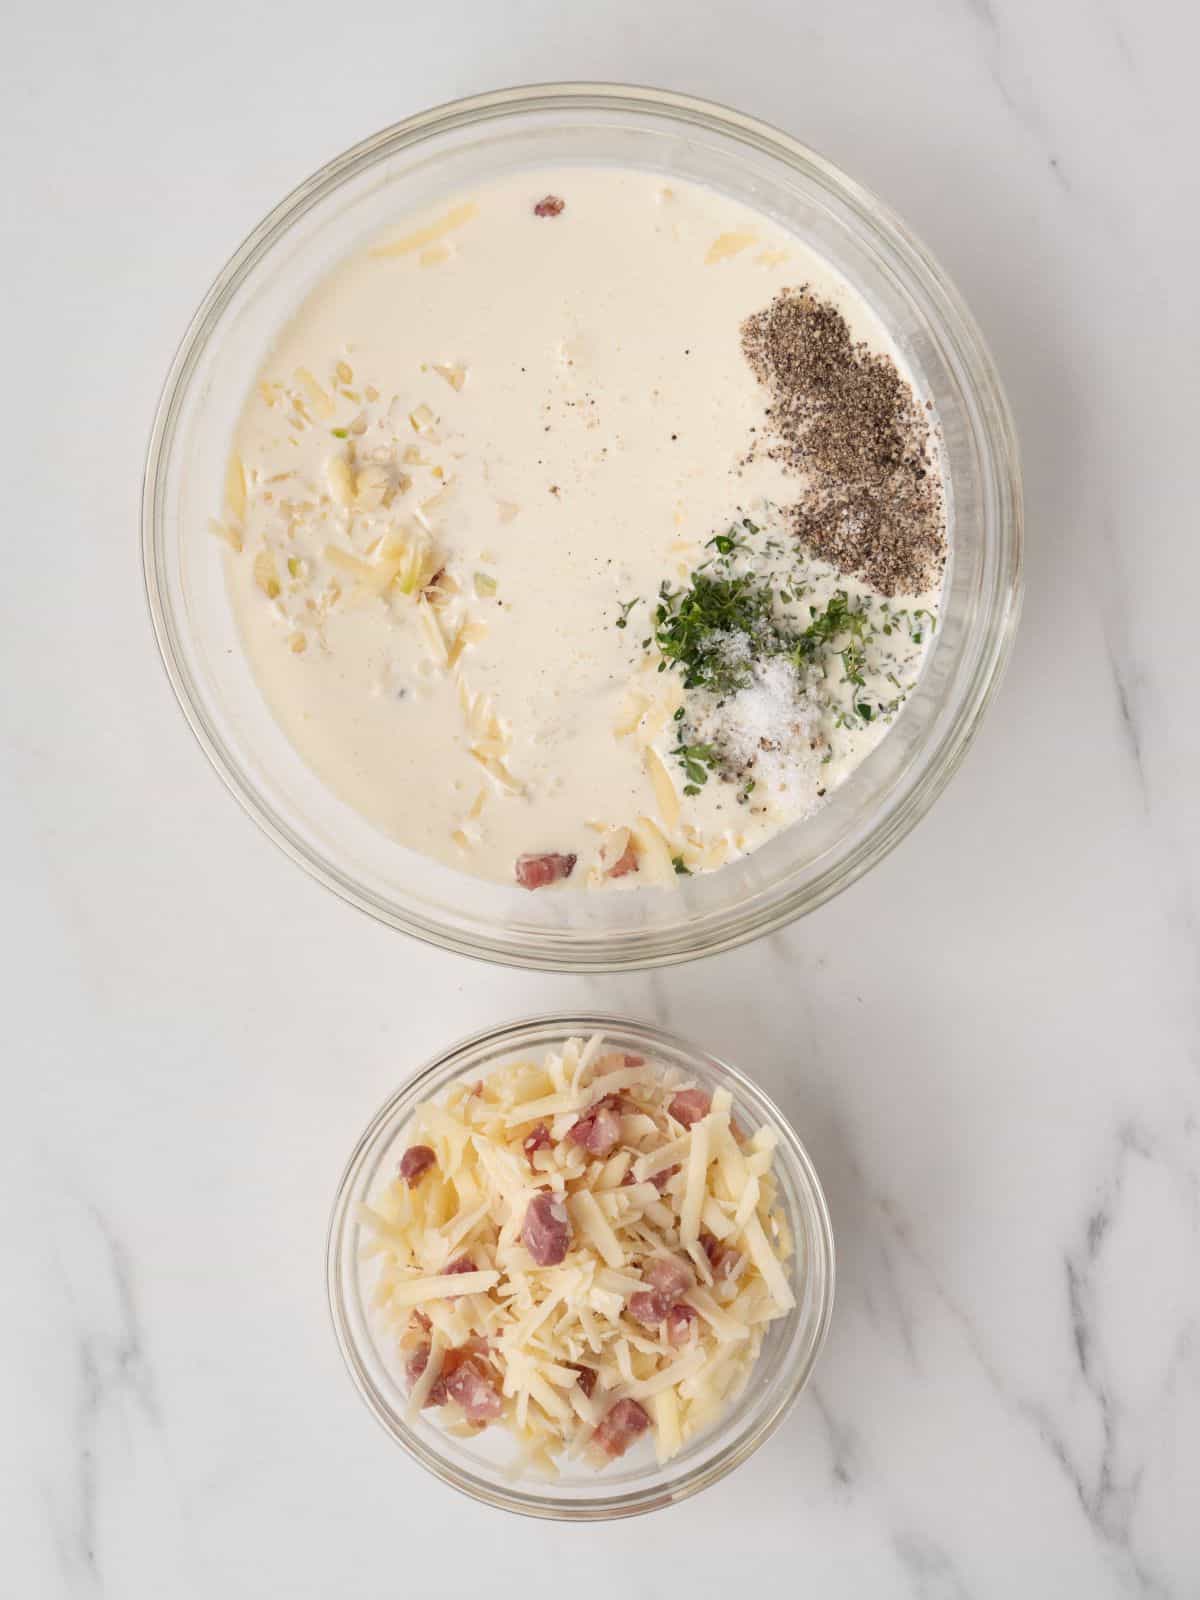 A small glass mixing bowl of cooked pancetta and shredded cheese along with a bigger glass mixing bowl of the same mixture with cream, garlic and thyme.